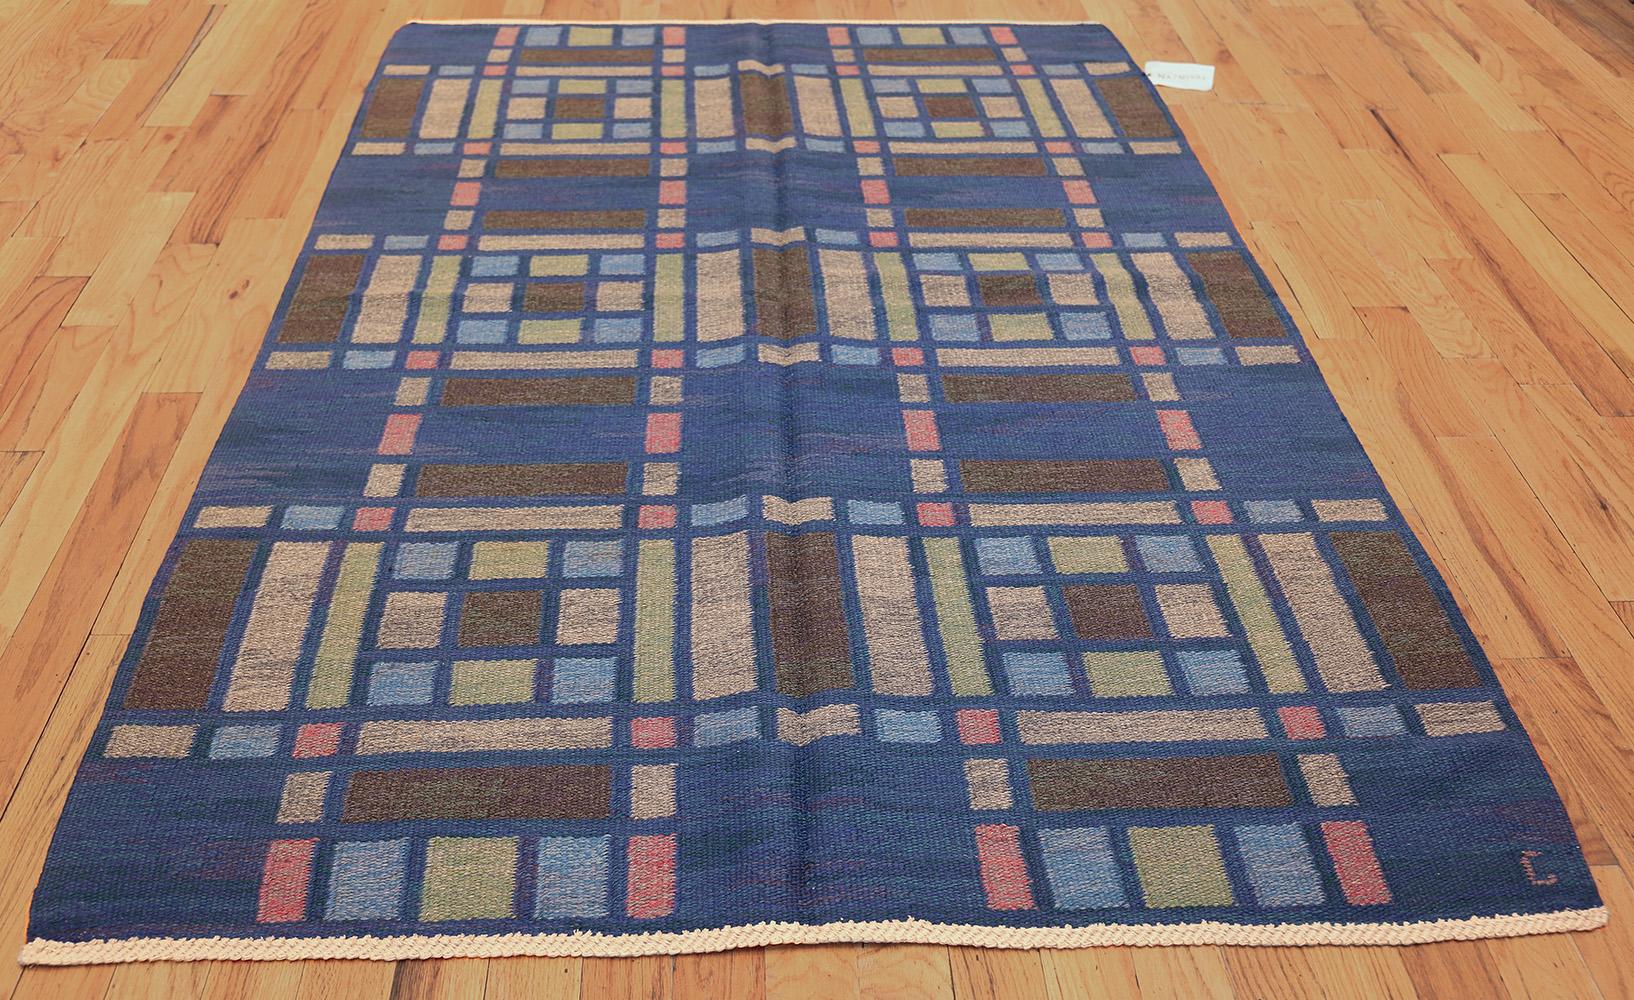 Vintage Swedish rug by Judith Johansson, Origin: Sweden, circa midcentury. Size: 5 ft x 7 ft 7 in (1.52 m x 2.31 m)

This splendid vintage rug from Scandinavia by weaver Judith Johansson features a striking compartmental composition with strong